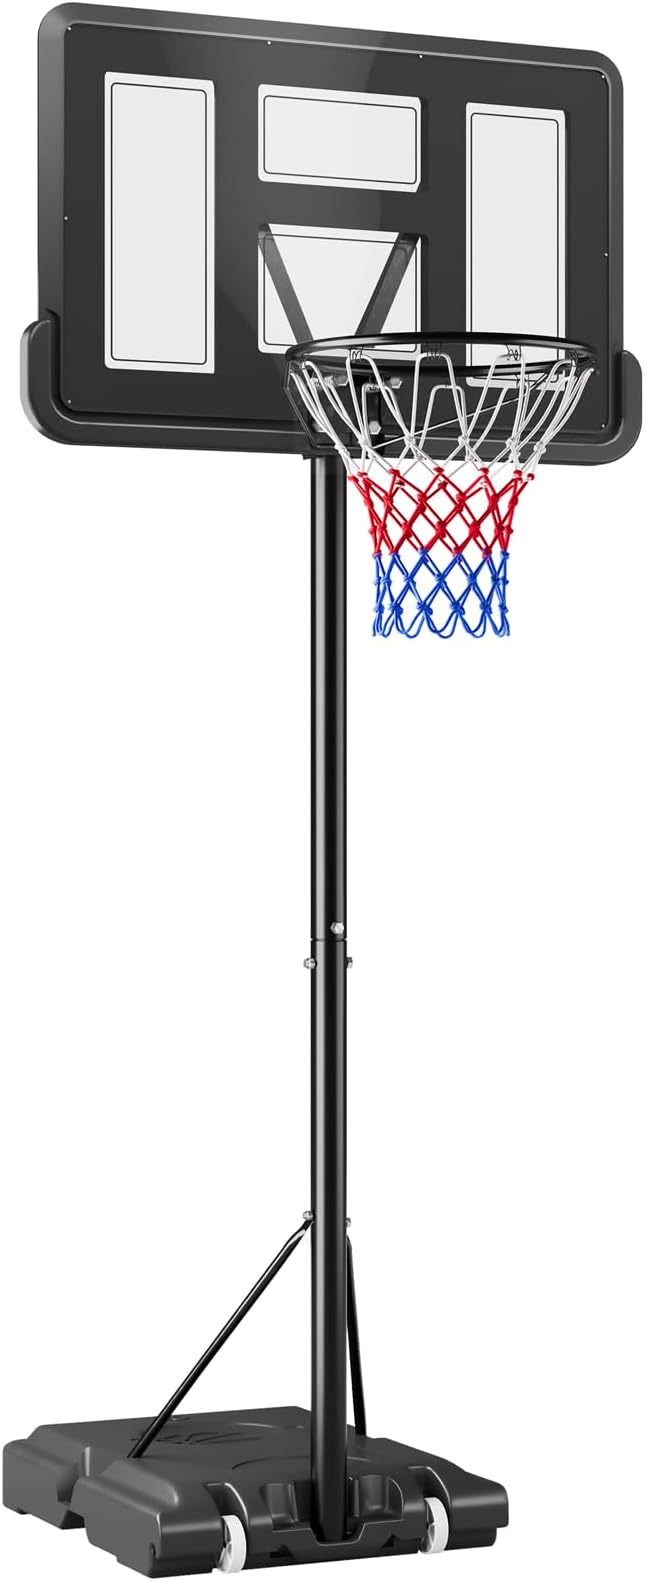 dripex portable basketball hoop 10ft outdoor adjustable goal system 44in backboard for kids  ‎dripex